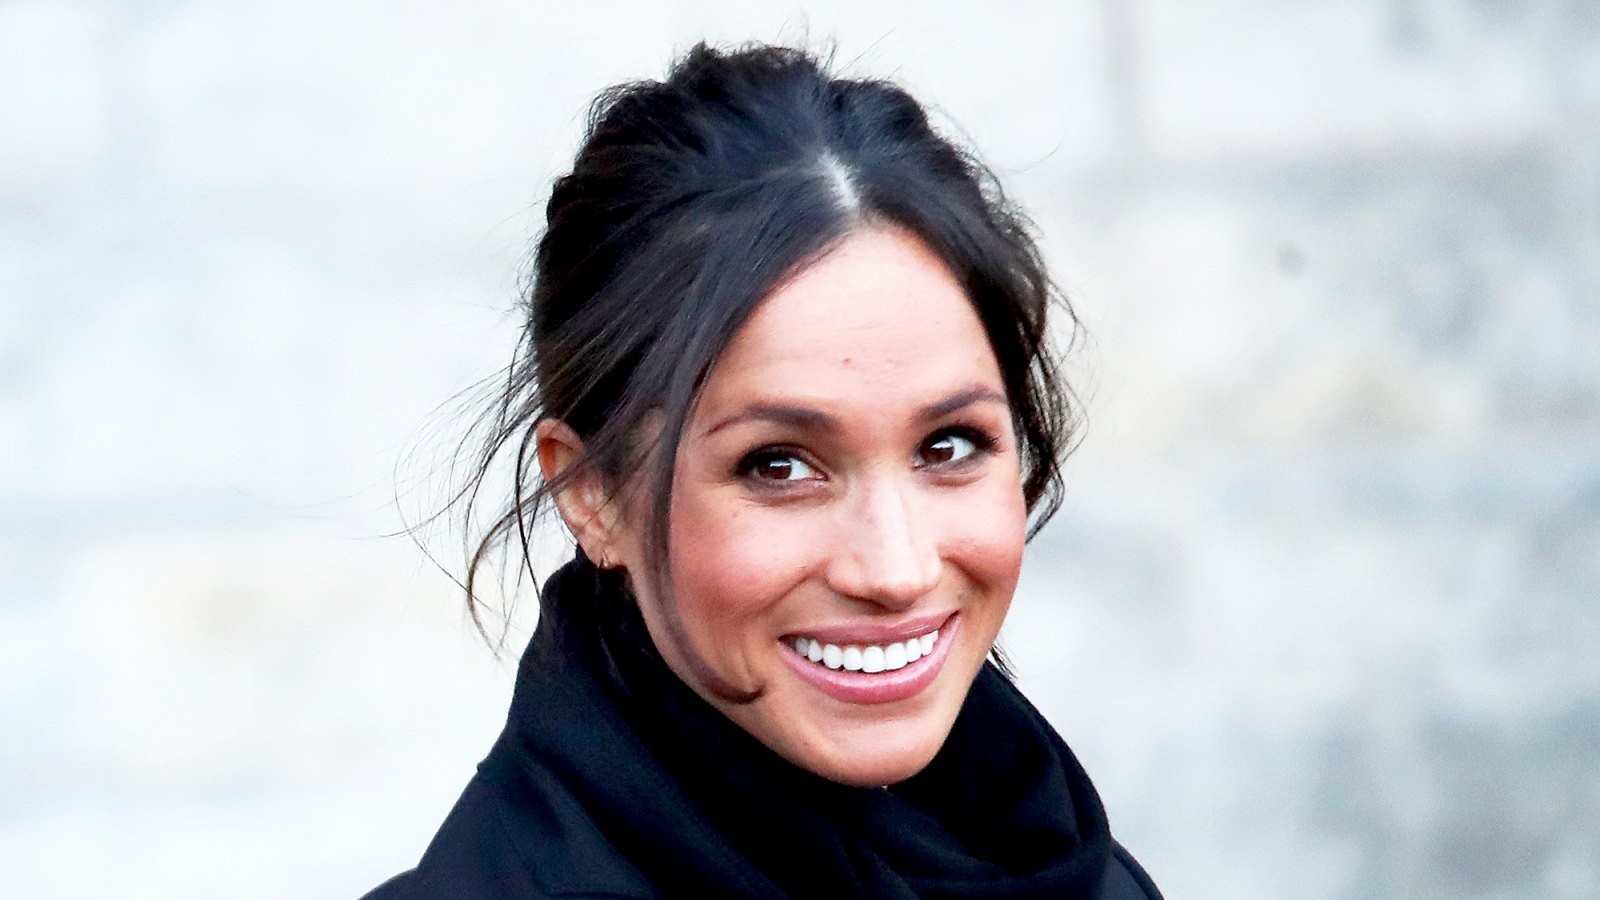 Meghan Markle seen at Cardiff Castle on January 18, 2018 in Cardiff, Wales.